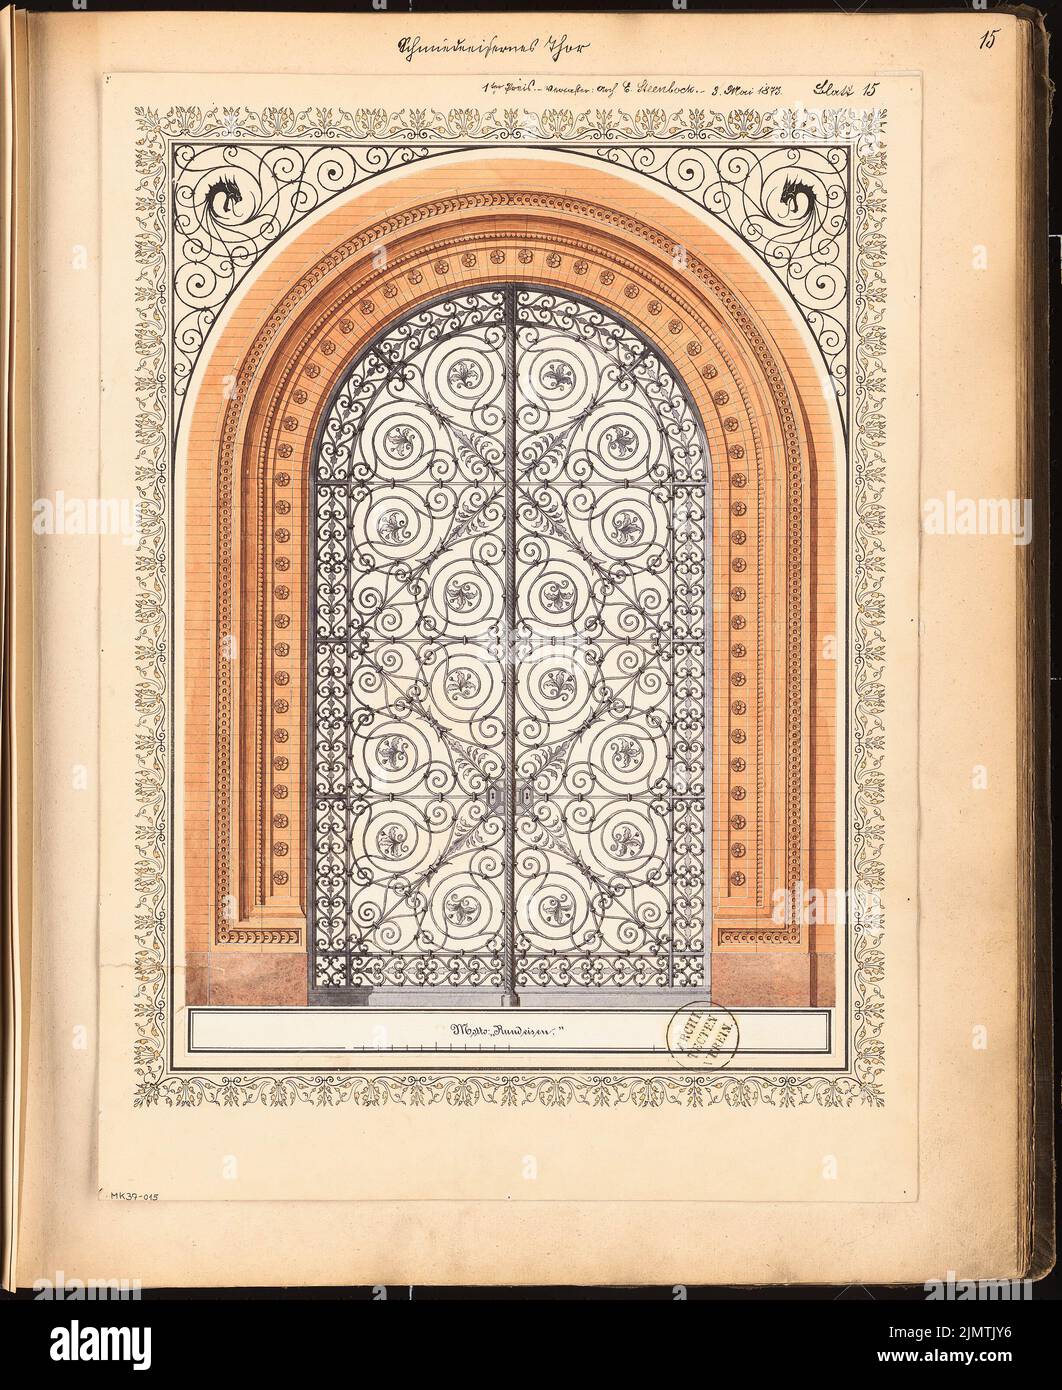 Steenbock Ernst (1850-1878), wrought-iron gate. Monthly competition May 1873 (05.1873): View; Scale bar. Tusche watercolor on paper, 59.8 x 48.9 cm (including scan edges) Steenbock Ernst  (1850-1878): Schmiedeeisernes Tor. Monatskonkurrenz Mai 1873 Stock Photo